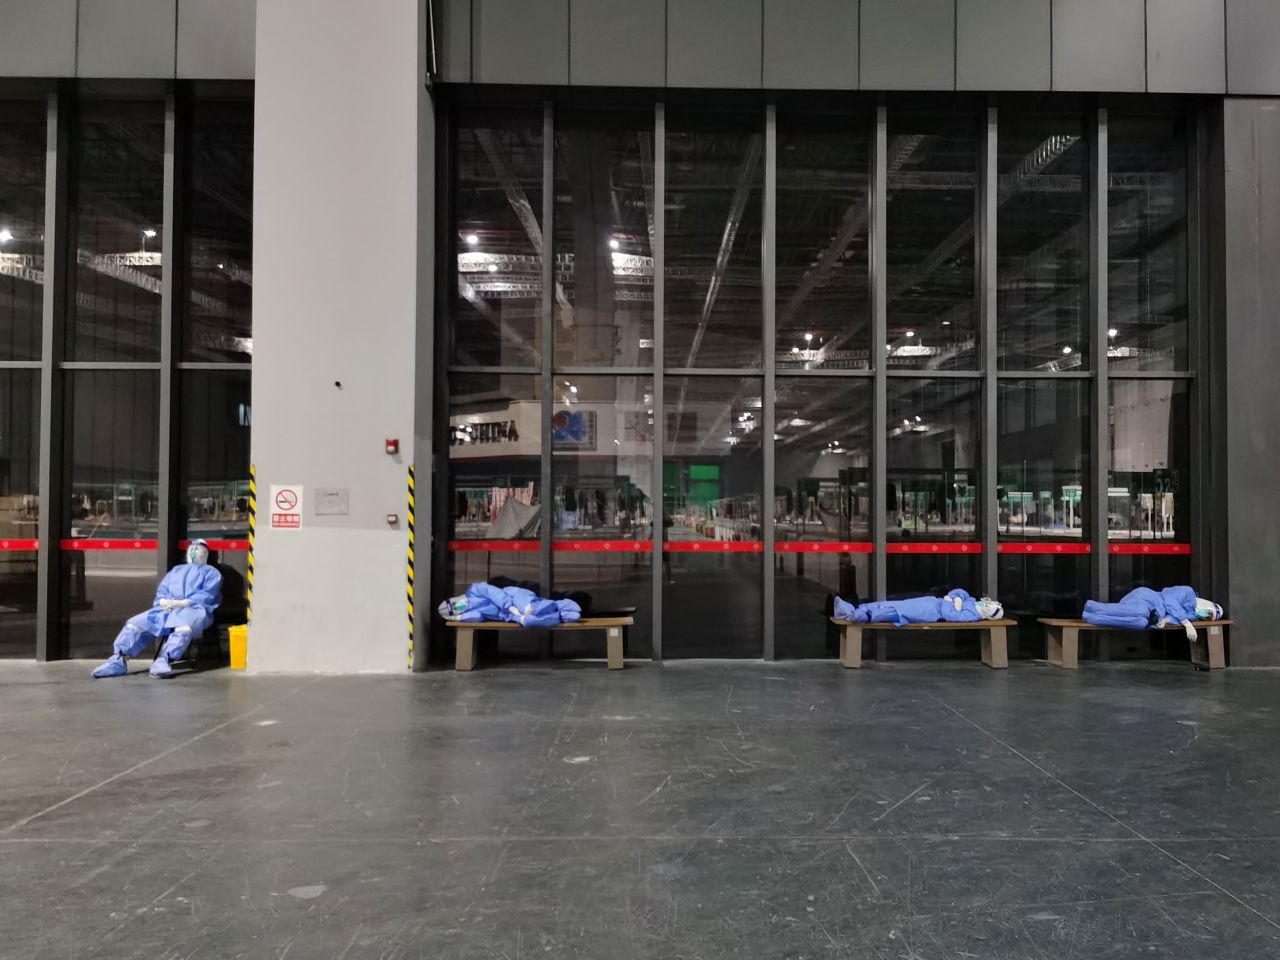 Nurses rest at a temporary hospital set up for Covid-19 patients in Shanghai, China, on Saturday, April 23. The city <a href="https://www.cnn.com/2022/04/19/china/shanghai-covid-lockdown-nightmare-intl-dst-hnk/index.html" target="_blank">has been under lockdown</a> since March.